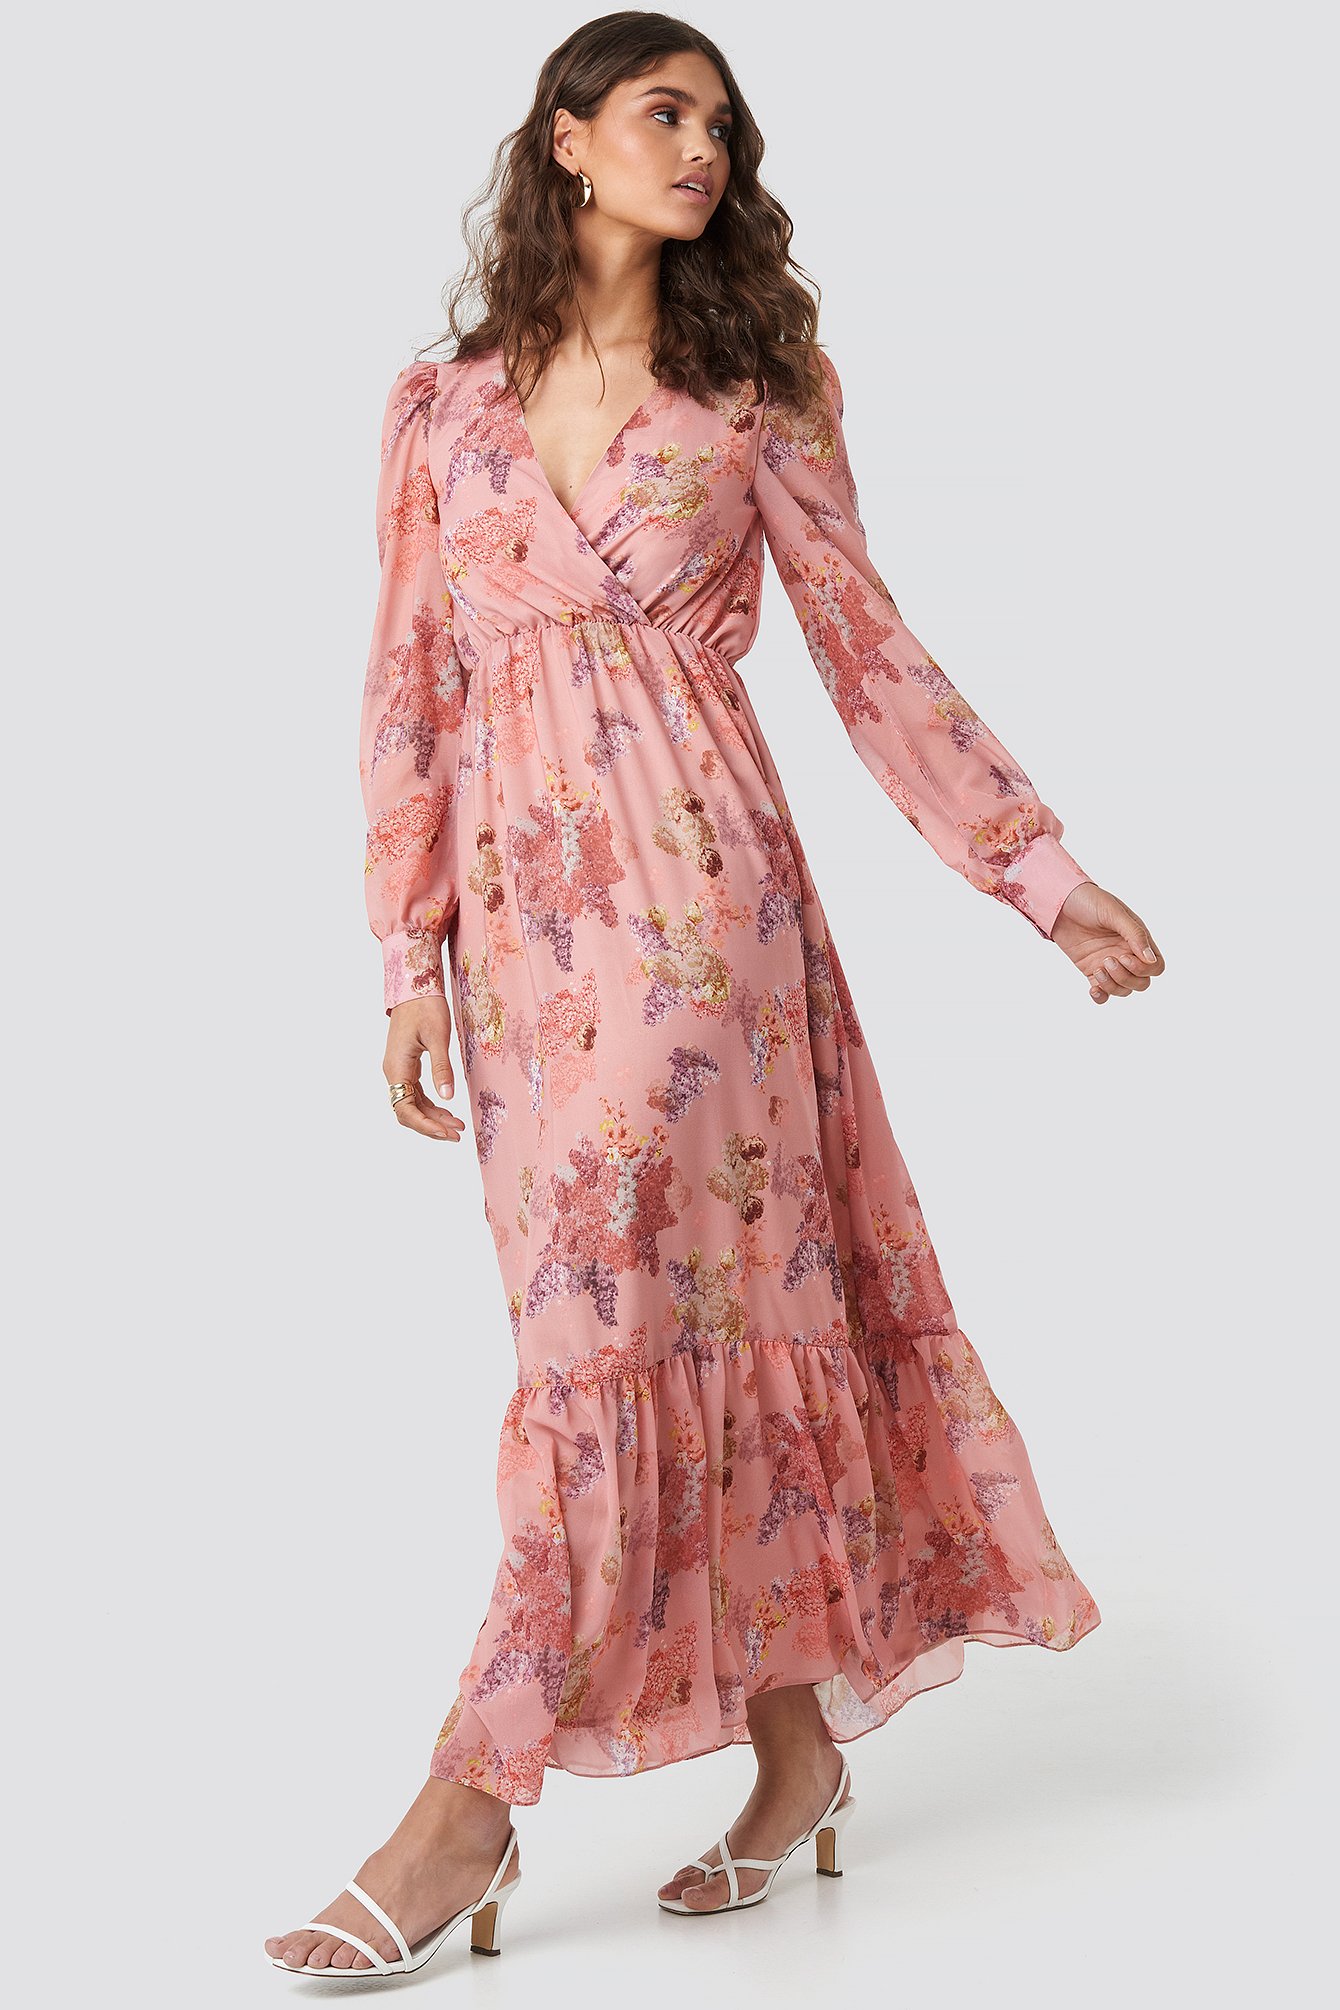 dusty rose floral maxi dress